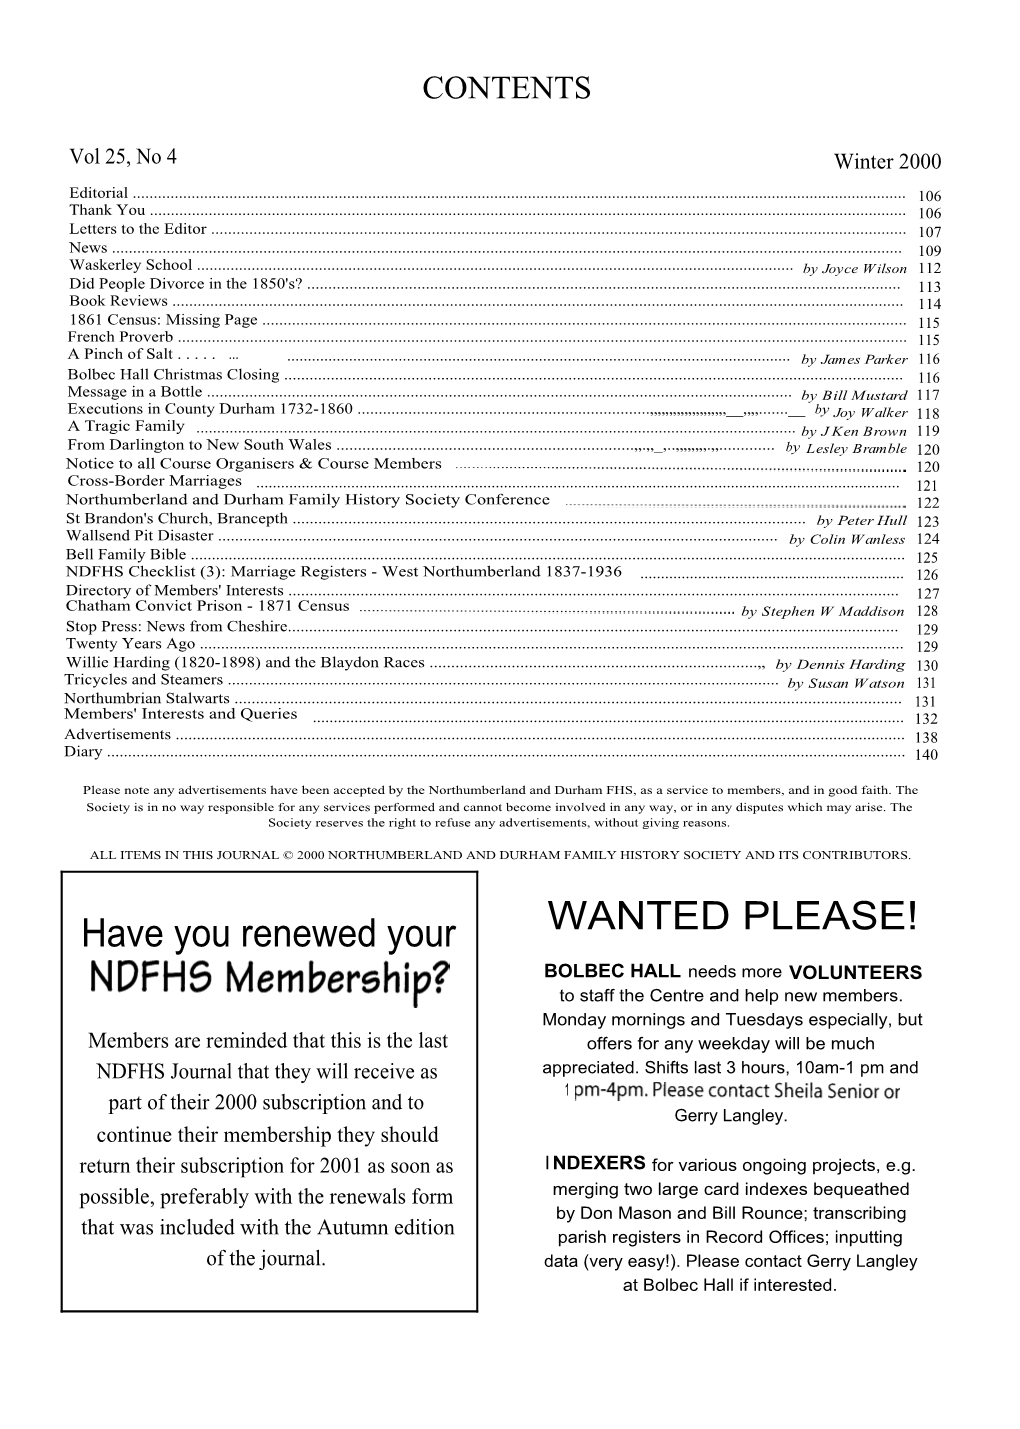 Have You Renewed Your NDFHS Membership? WANTED PLEASE!